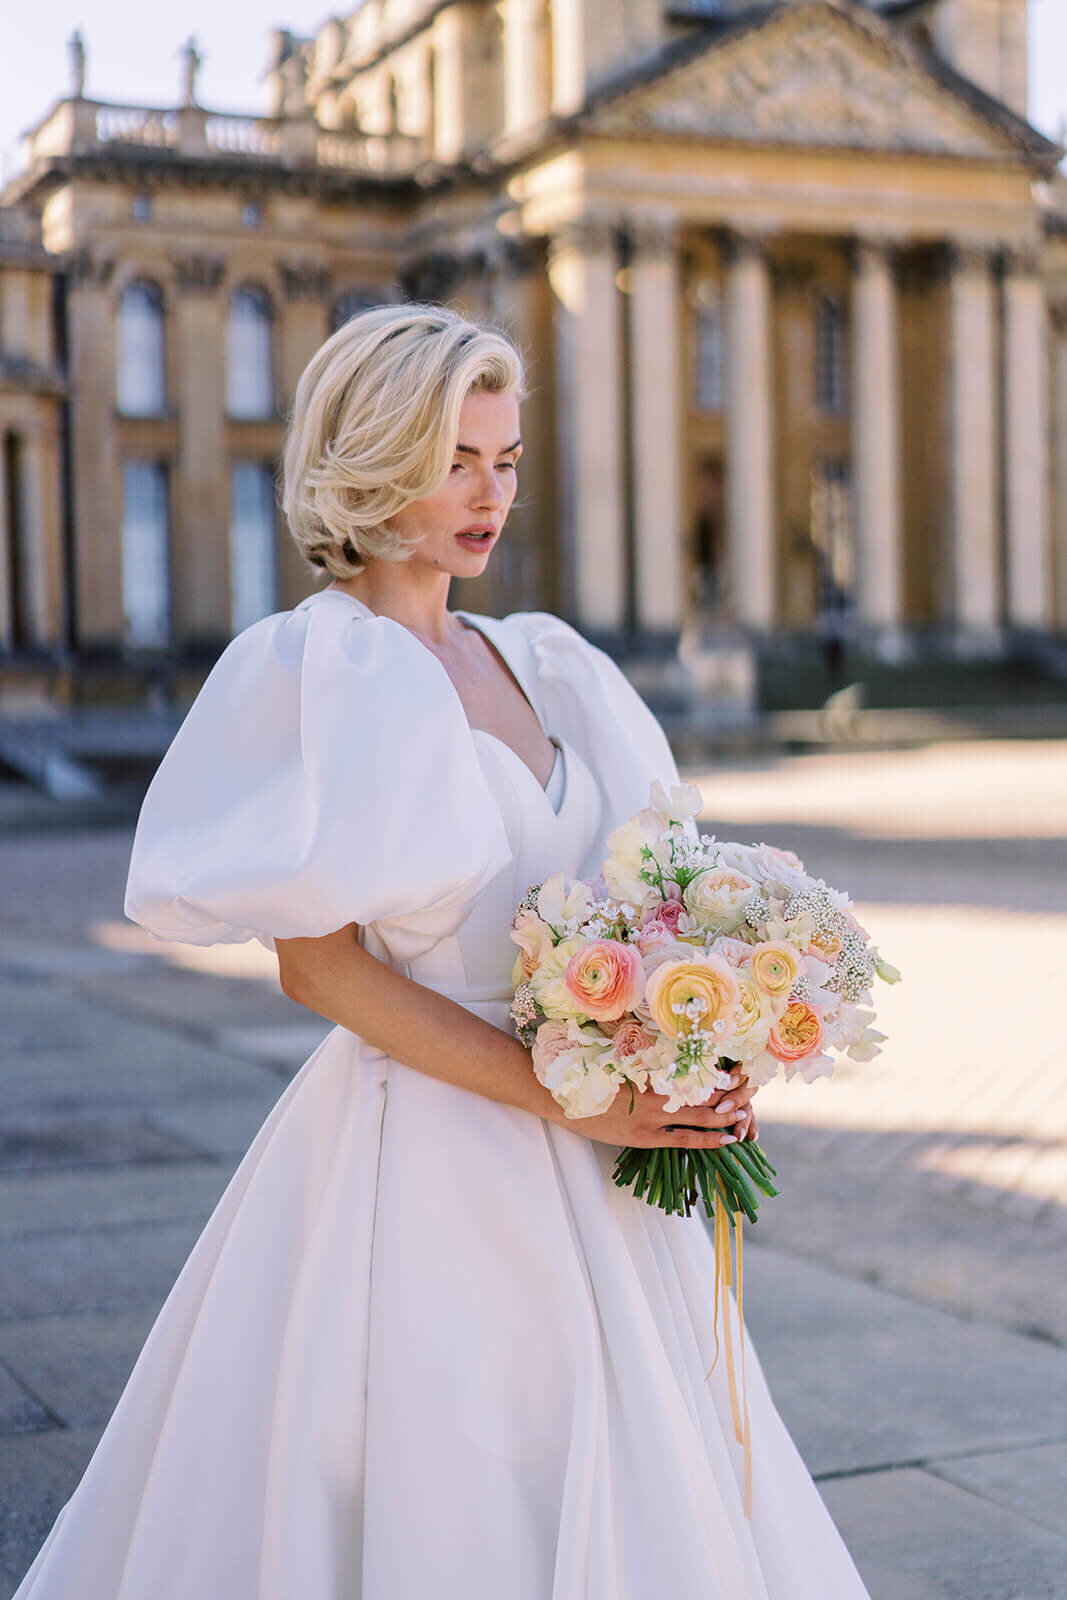 luxury bride standing in front of blenheim palace wearing a dress with large puffy sleeves and holding a peach wedding bouquet